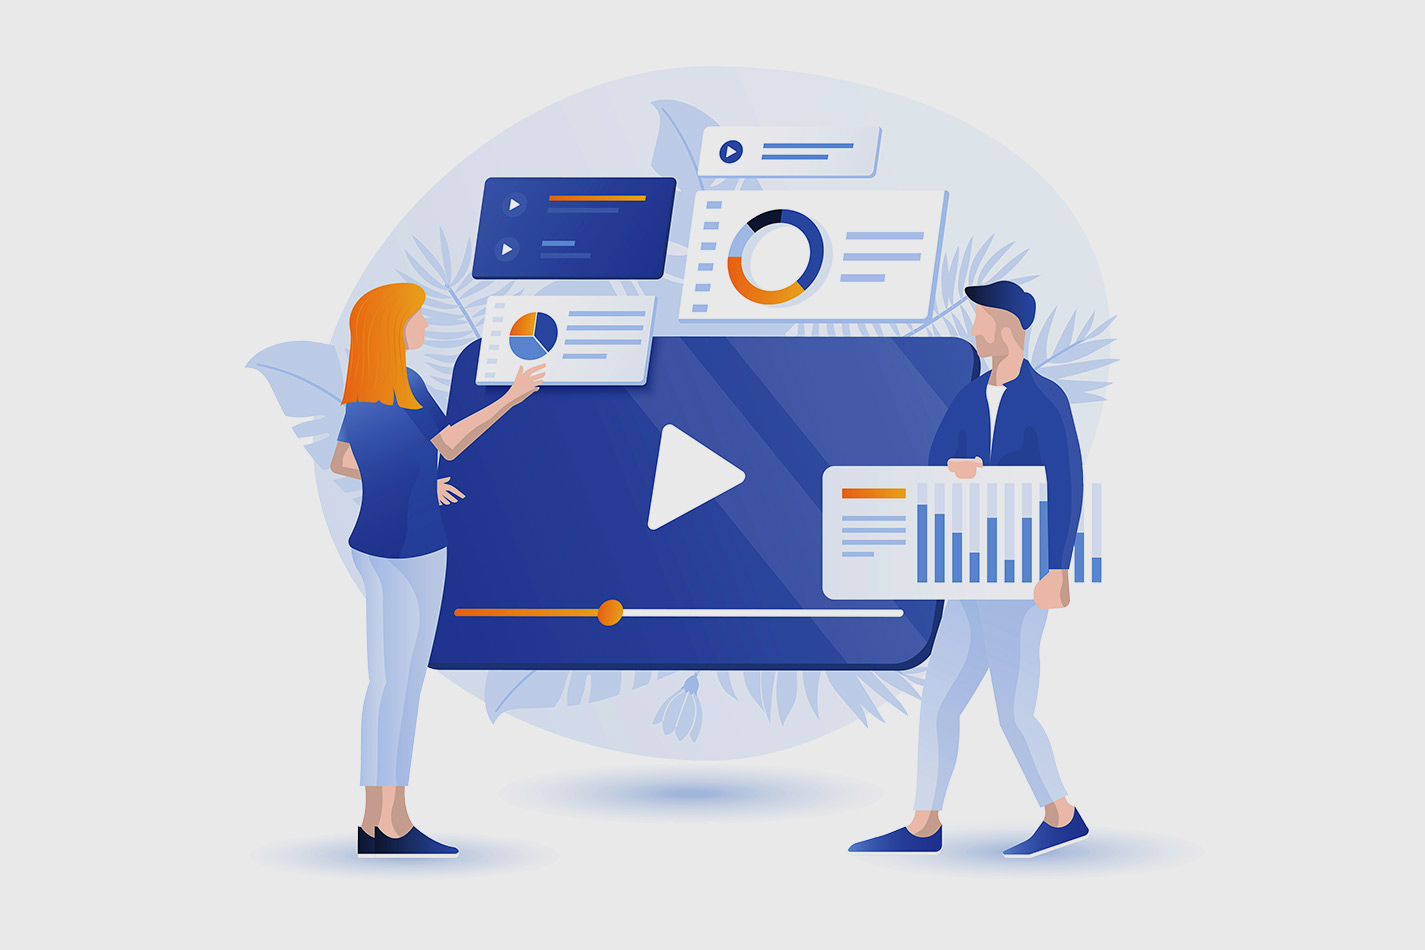 4 (Neglected) Uses Of An Explainer Video